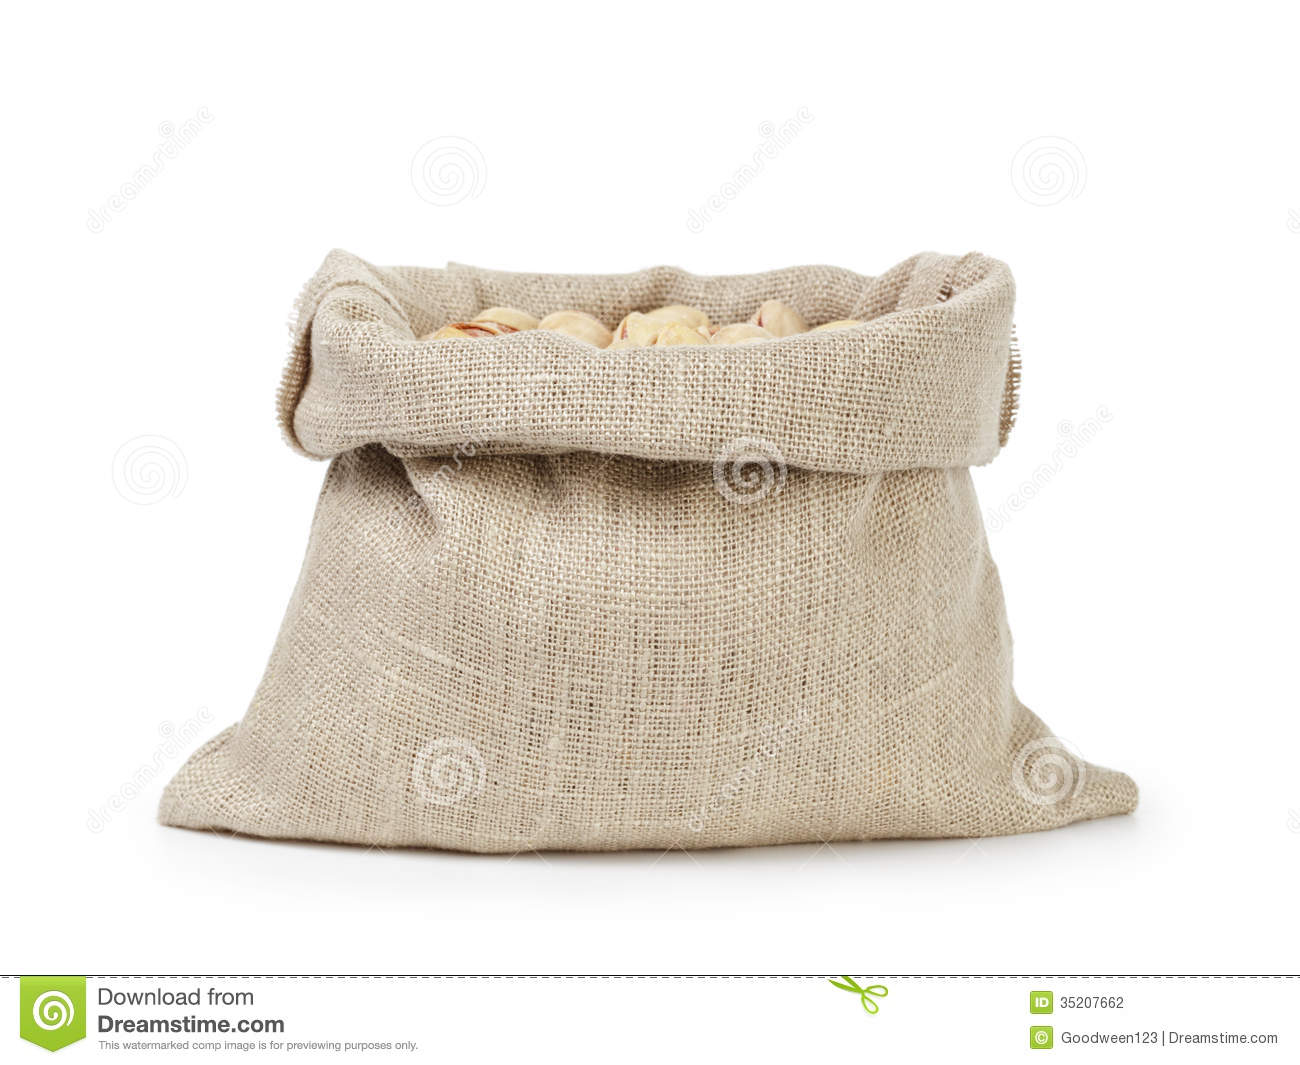 Roasted Salty Pistachios Nuts In Sack Bag Stock Photography   Image    